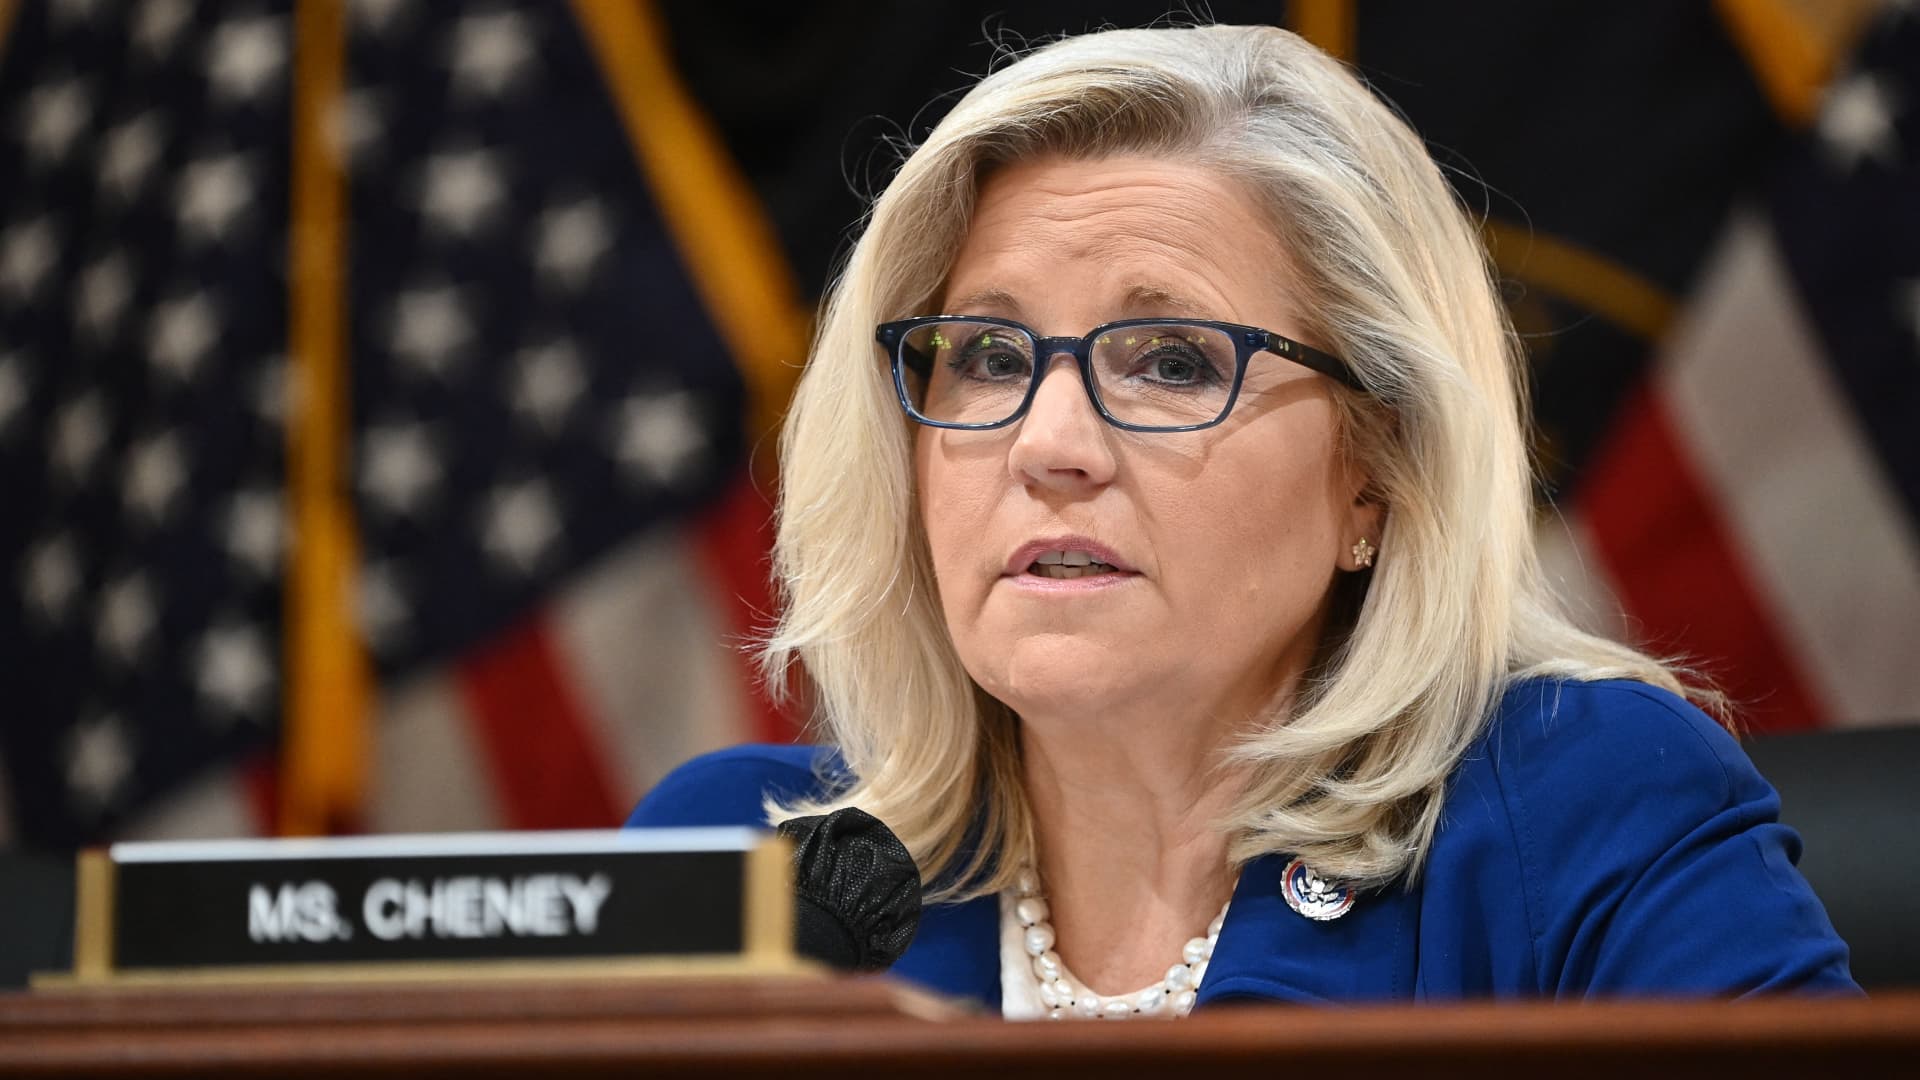 US Republican Representative Liz Cheney speaks during a House Select Committee hearing to Investigate the January 6th Attack on the US Capitol, in the Cannon House Office Building on Capitol Hill in Washington, DC on June 21, 2022.